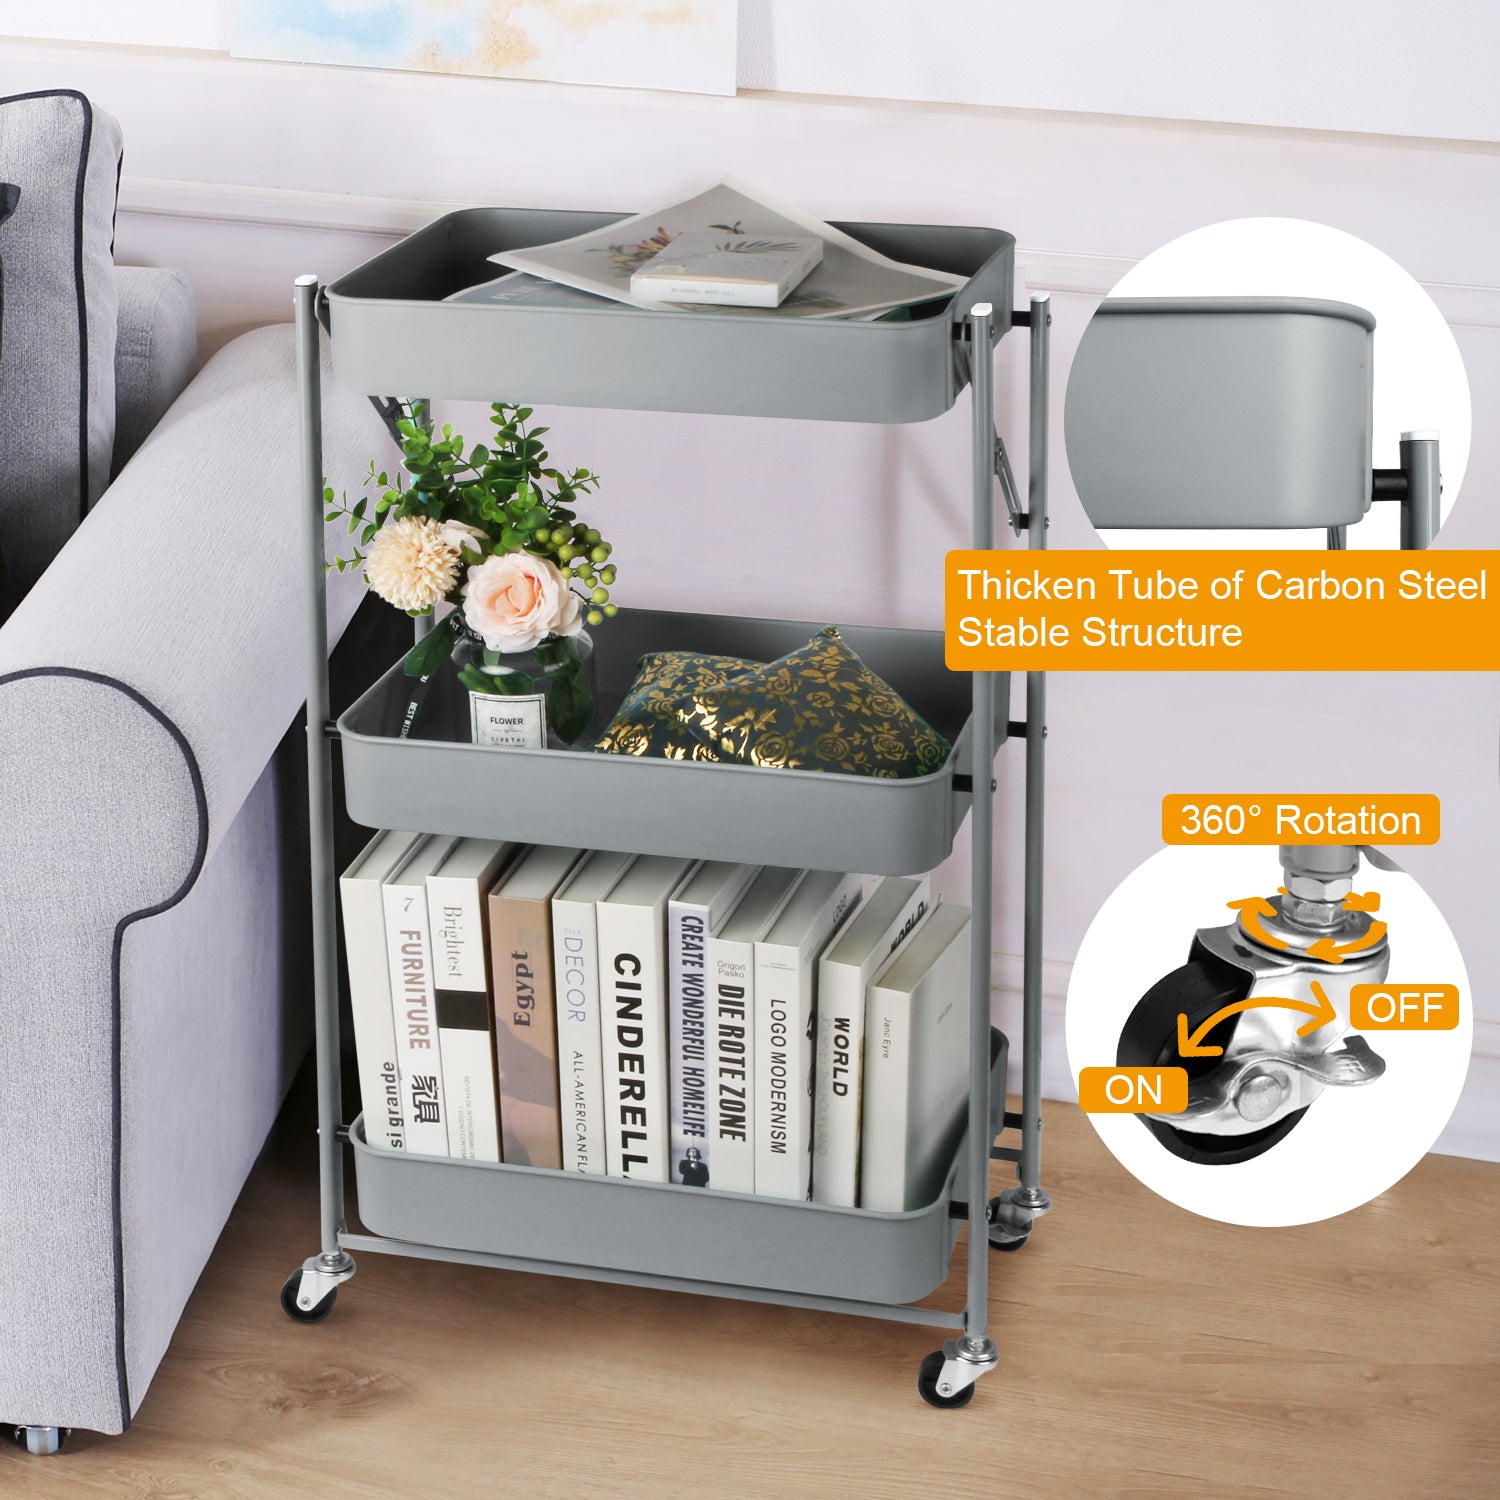 Todeco-Folding-Trolley-with-Wheels-3-Tier-Mobile-Cart-Kitchen-Cart-No-Assembly-46-x-29-x-78-cm-for-Kitchen-Office-Bathroom-Cloakroom-Gray-Folding-Trolley-with-Wheels-Gray